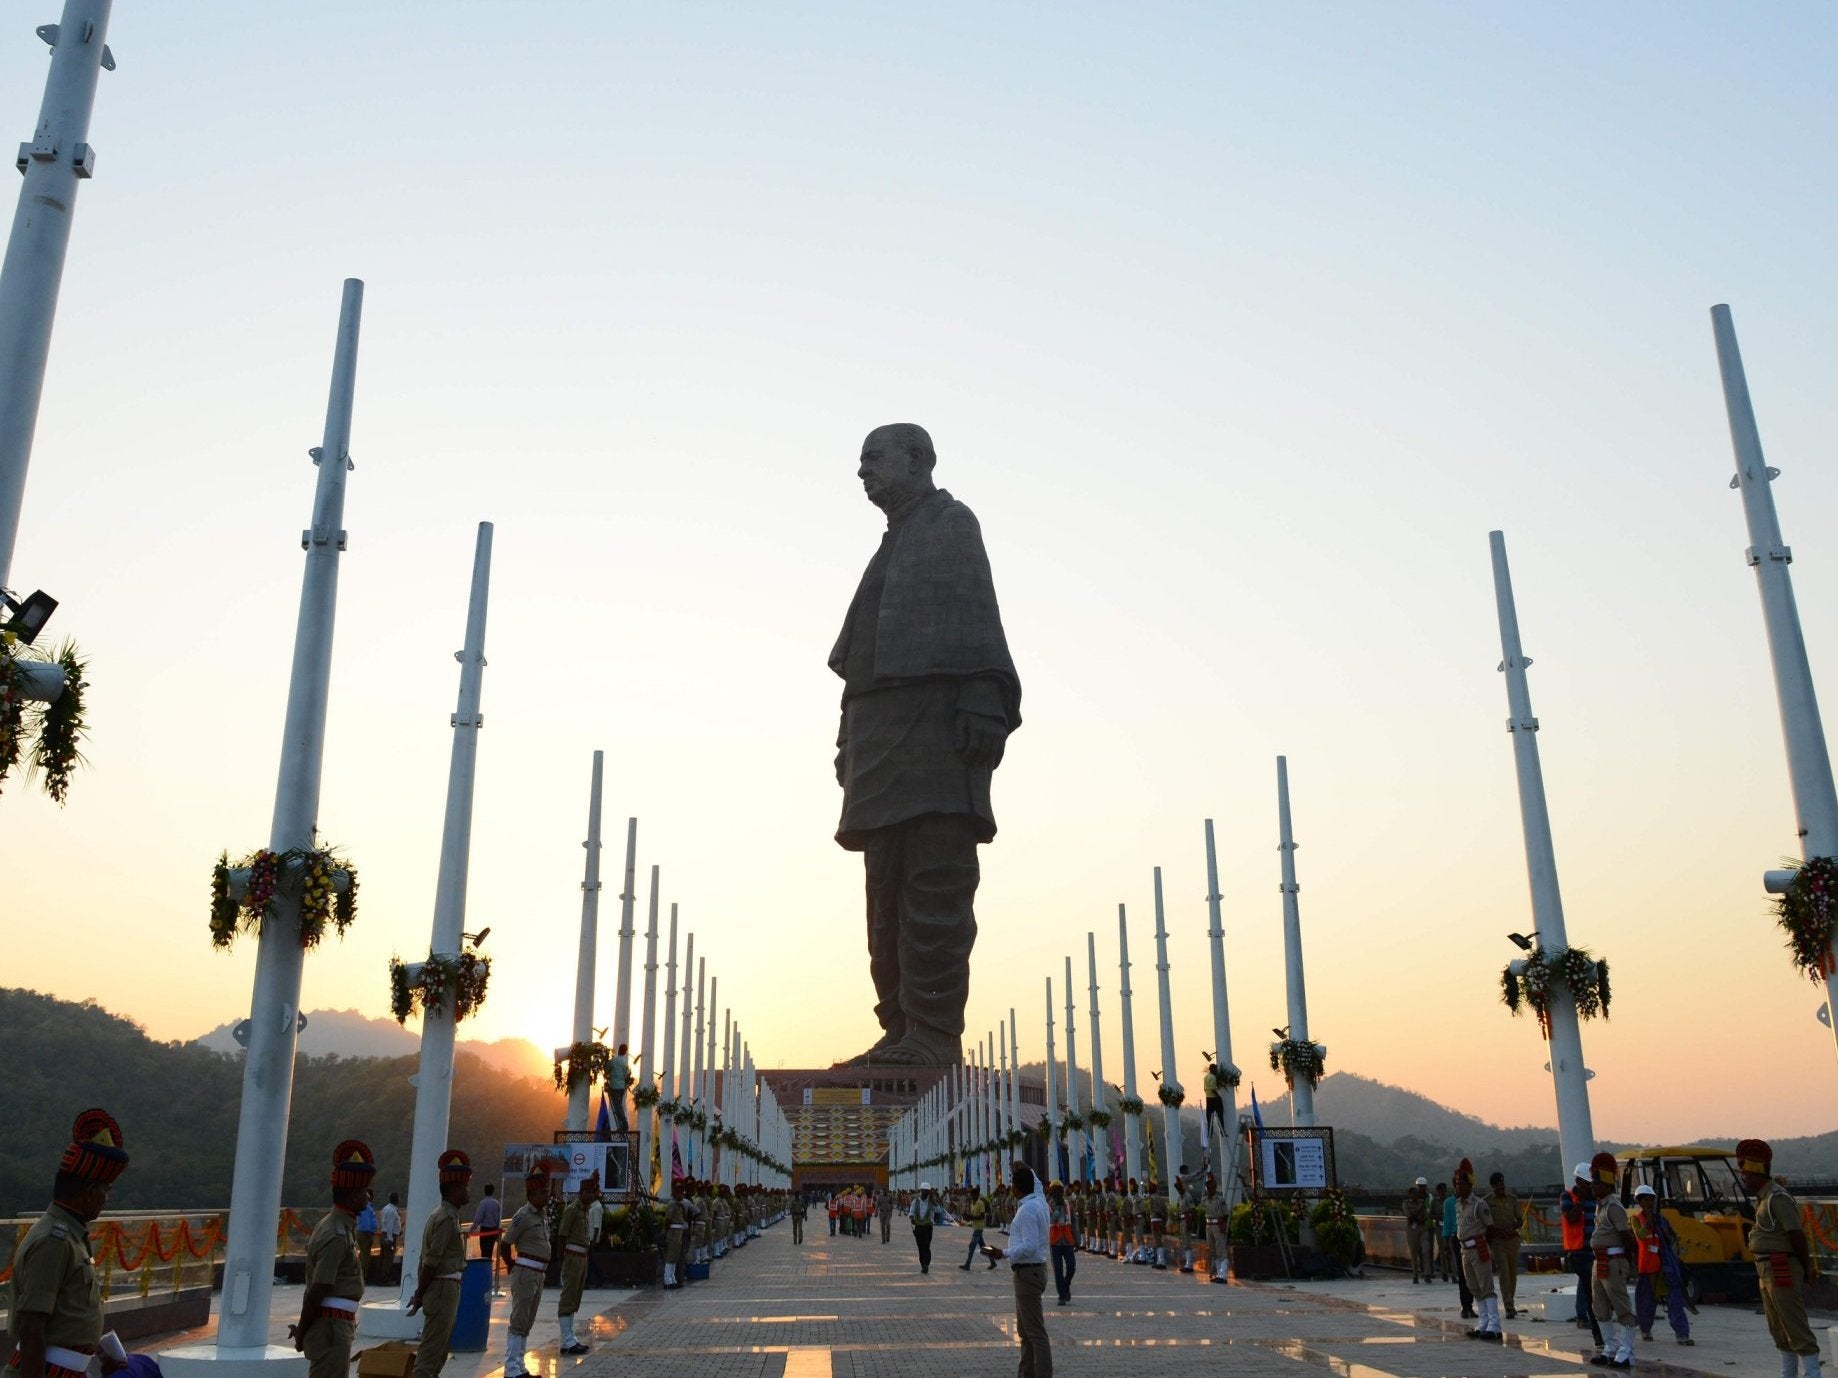 The "Statue Of Unity", the world's tallest statue dedicated to Indian independence leader Sardar Vallabhbhai Patel